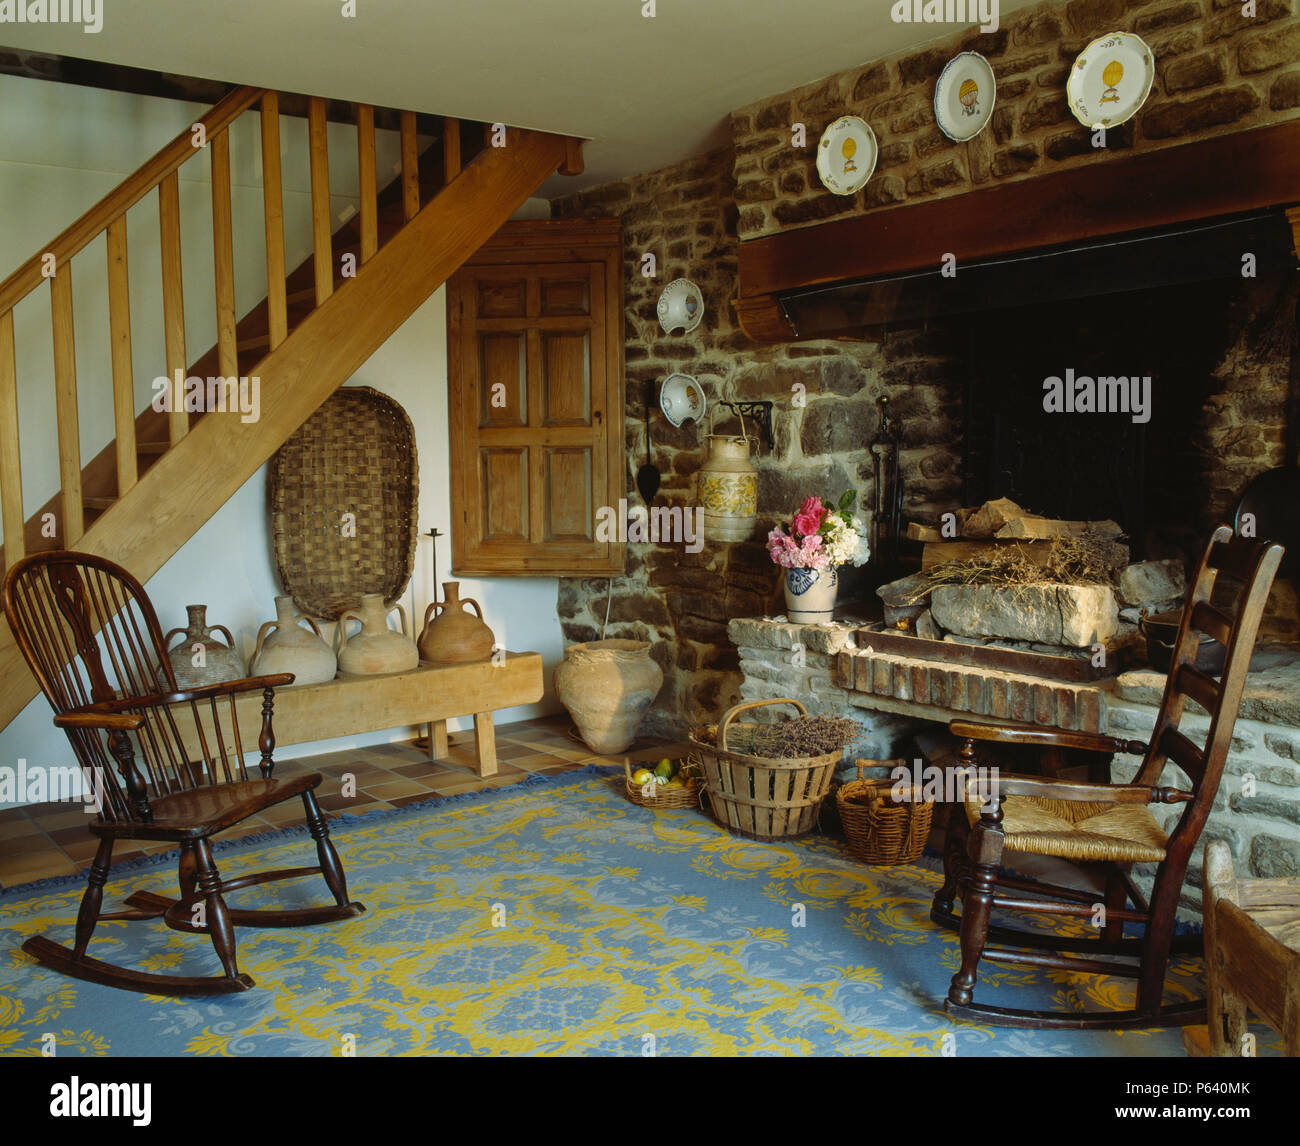 Antique rocking chairs beside inglenook fireplace in hall living room with wooden stairs and patterend blue carpet Stock Photo